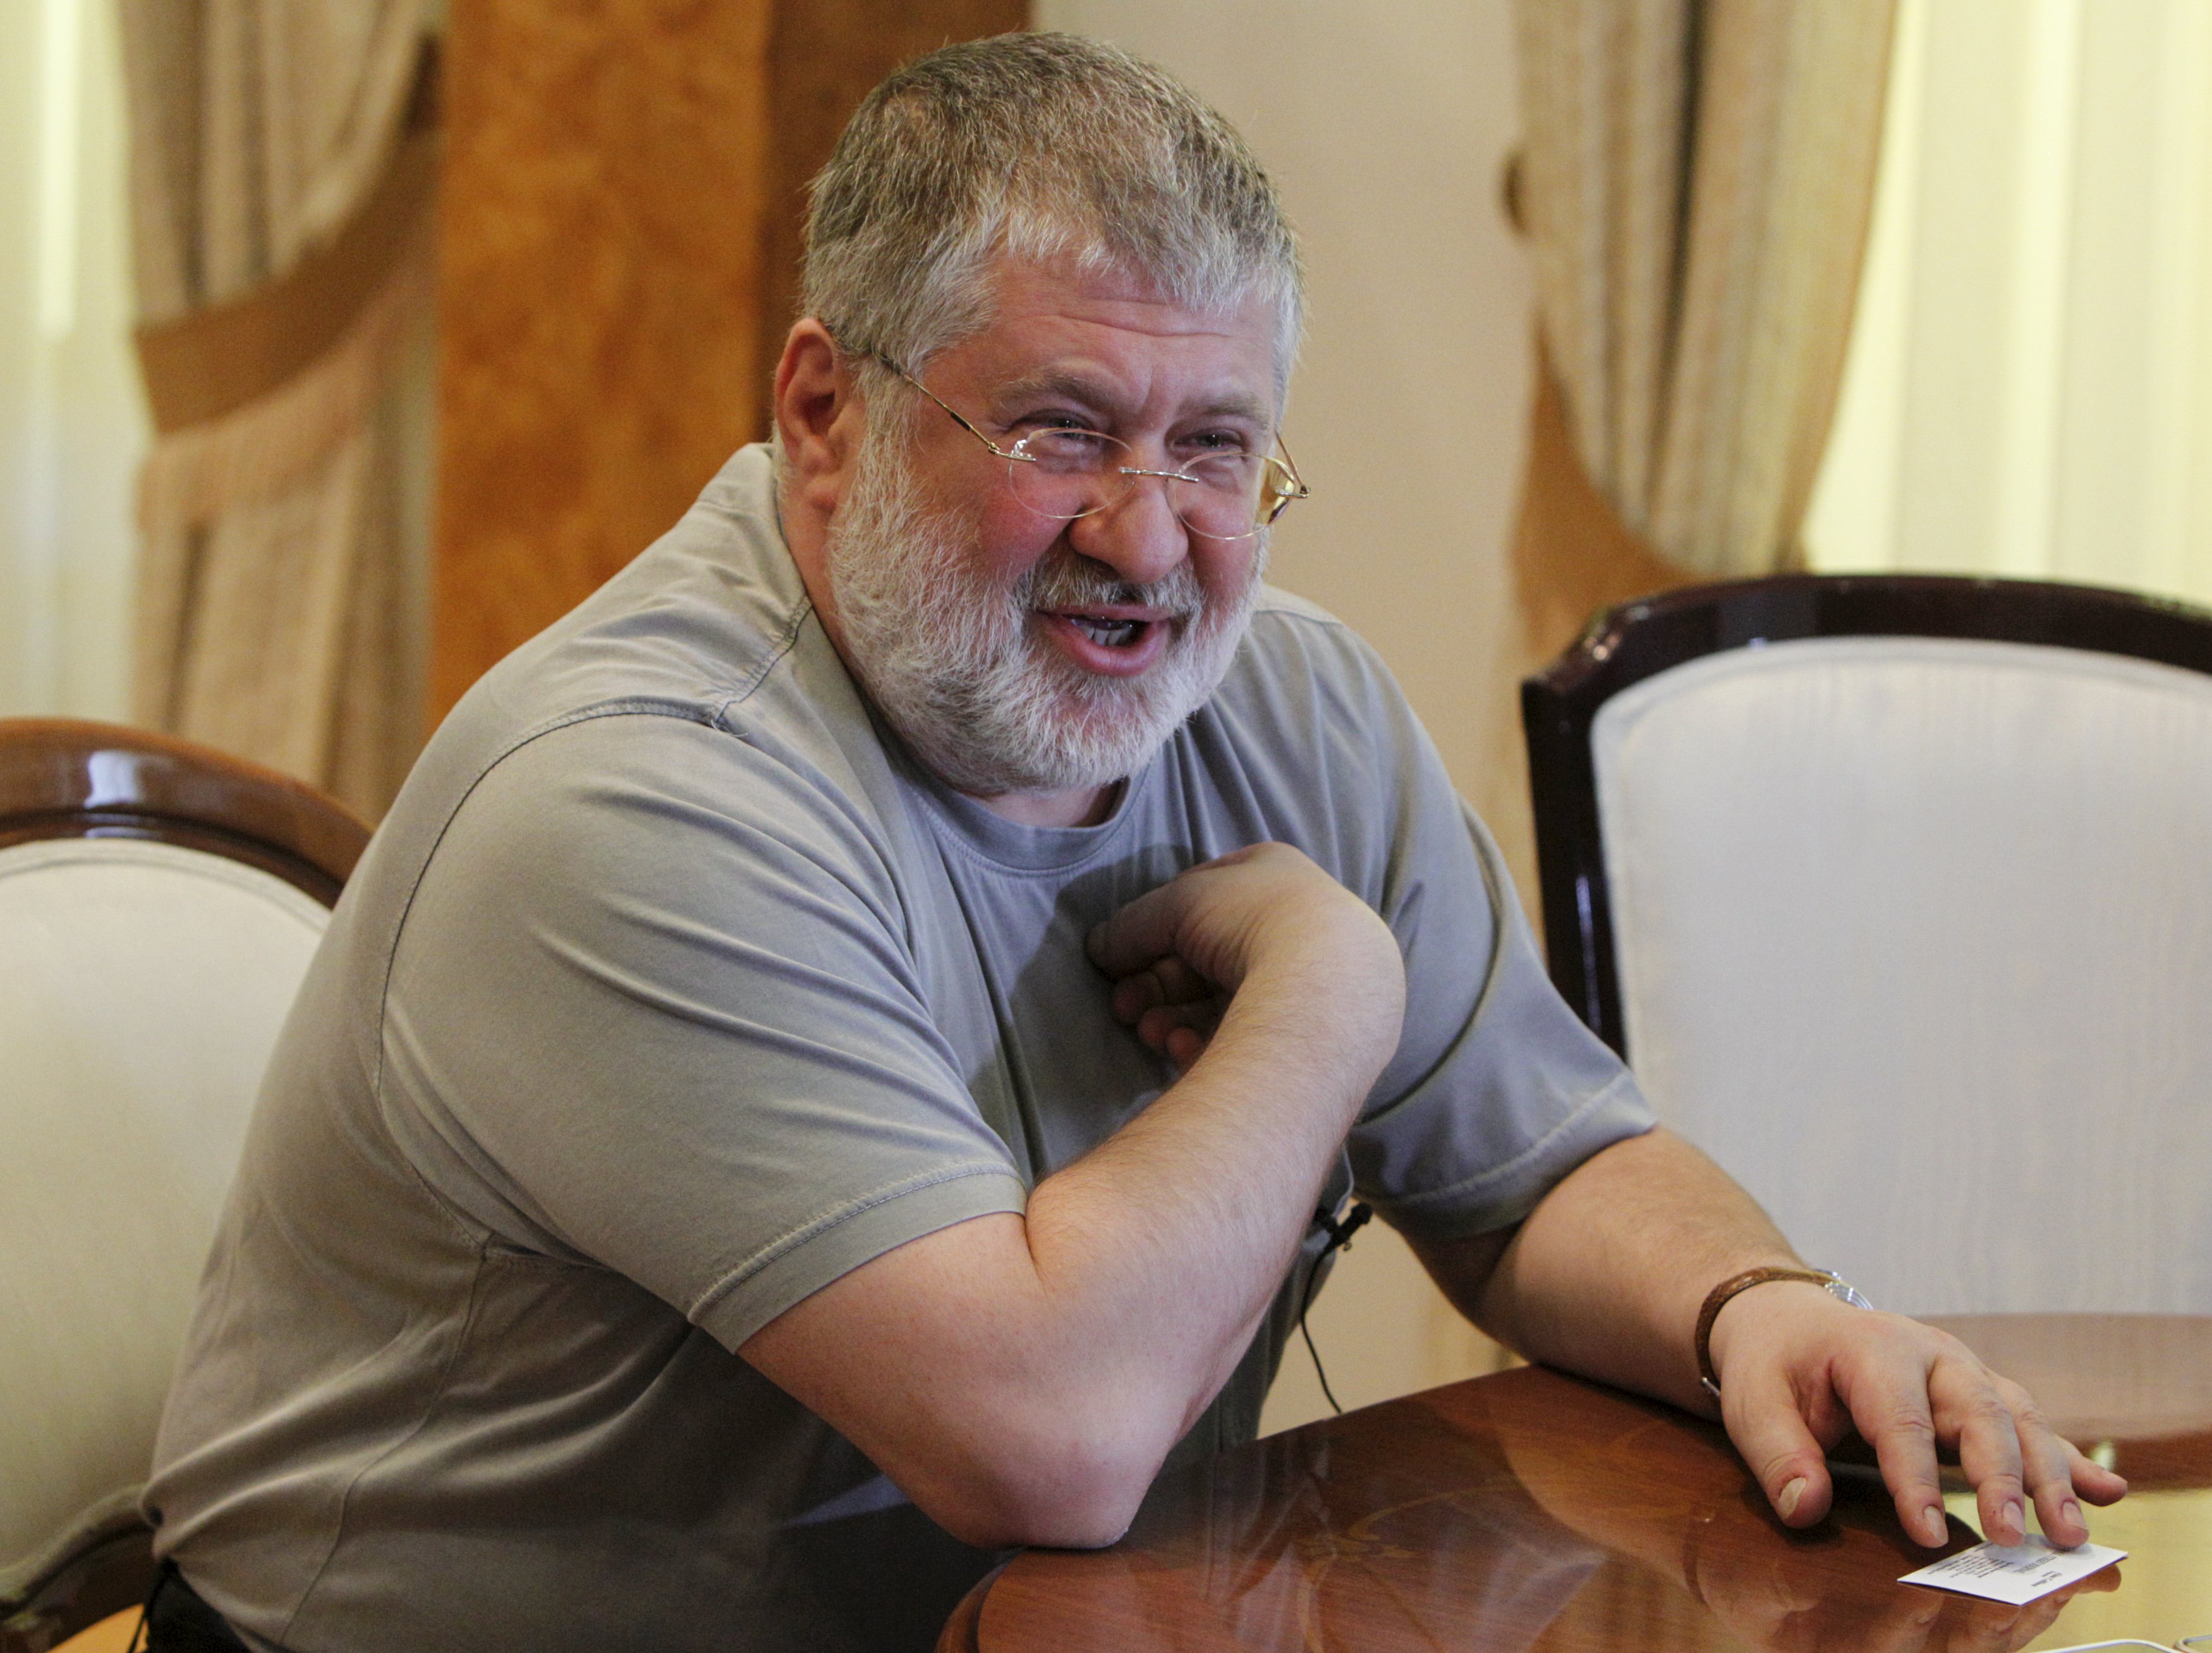 Igor Kolomoisky, billionaire and governor of the Dnipropetrovsk region, speaks during an interview in Dnipropetrovsk May 24, 2014 file photo. A raid by a group of armed men in combat fatigues on a state-owned oil company in the Ukrainian capital Kiev caused uproar in parliament on Friday and thrust banking billionaire Kolomoisky into the spotlight. REUTERS/Valentyn Ogirenko/Files